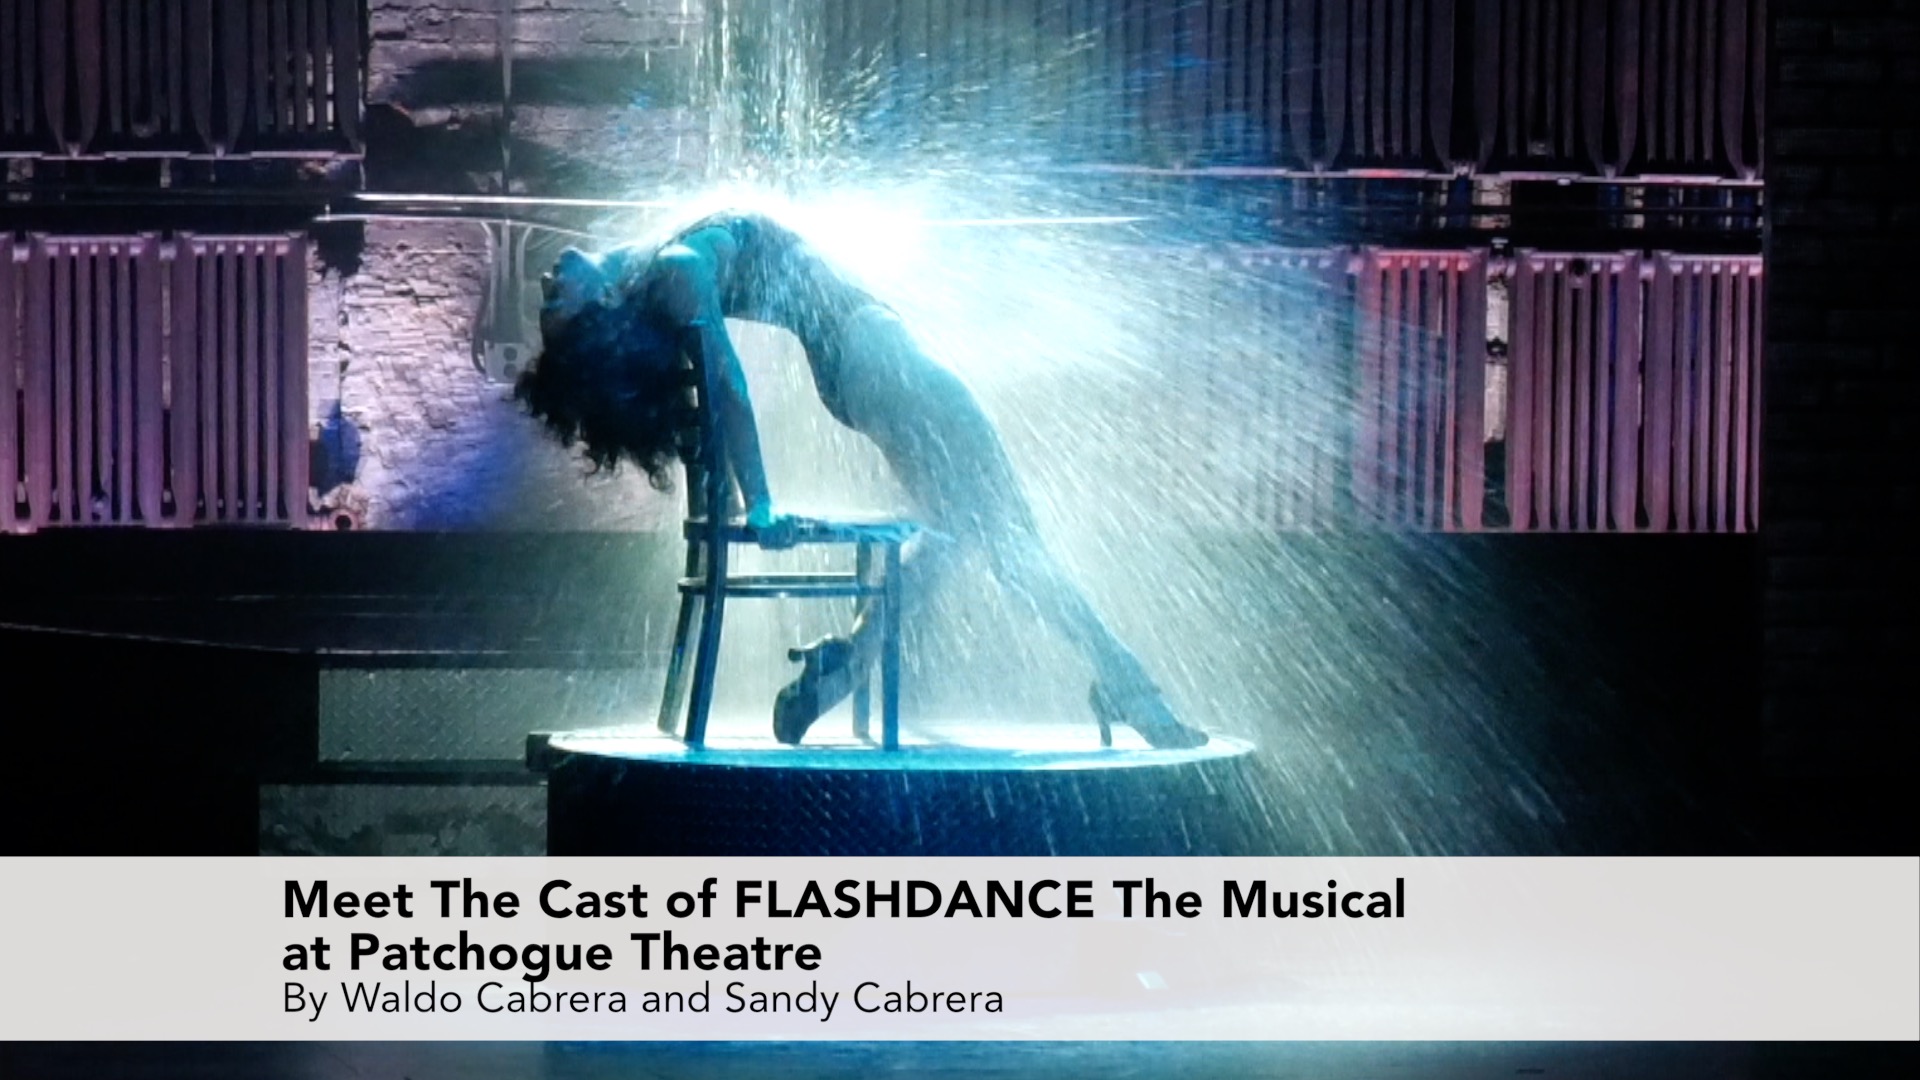 Meet The Cast of Flashdance at Patchogue Theatre